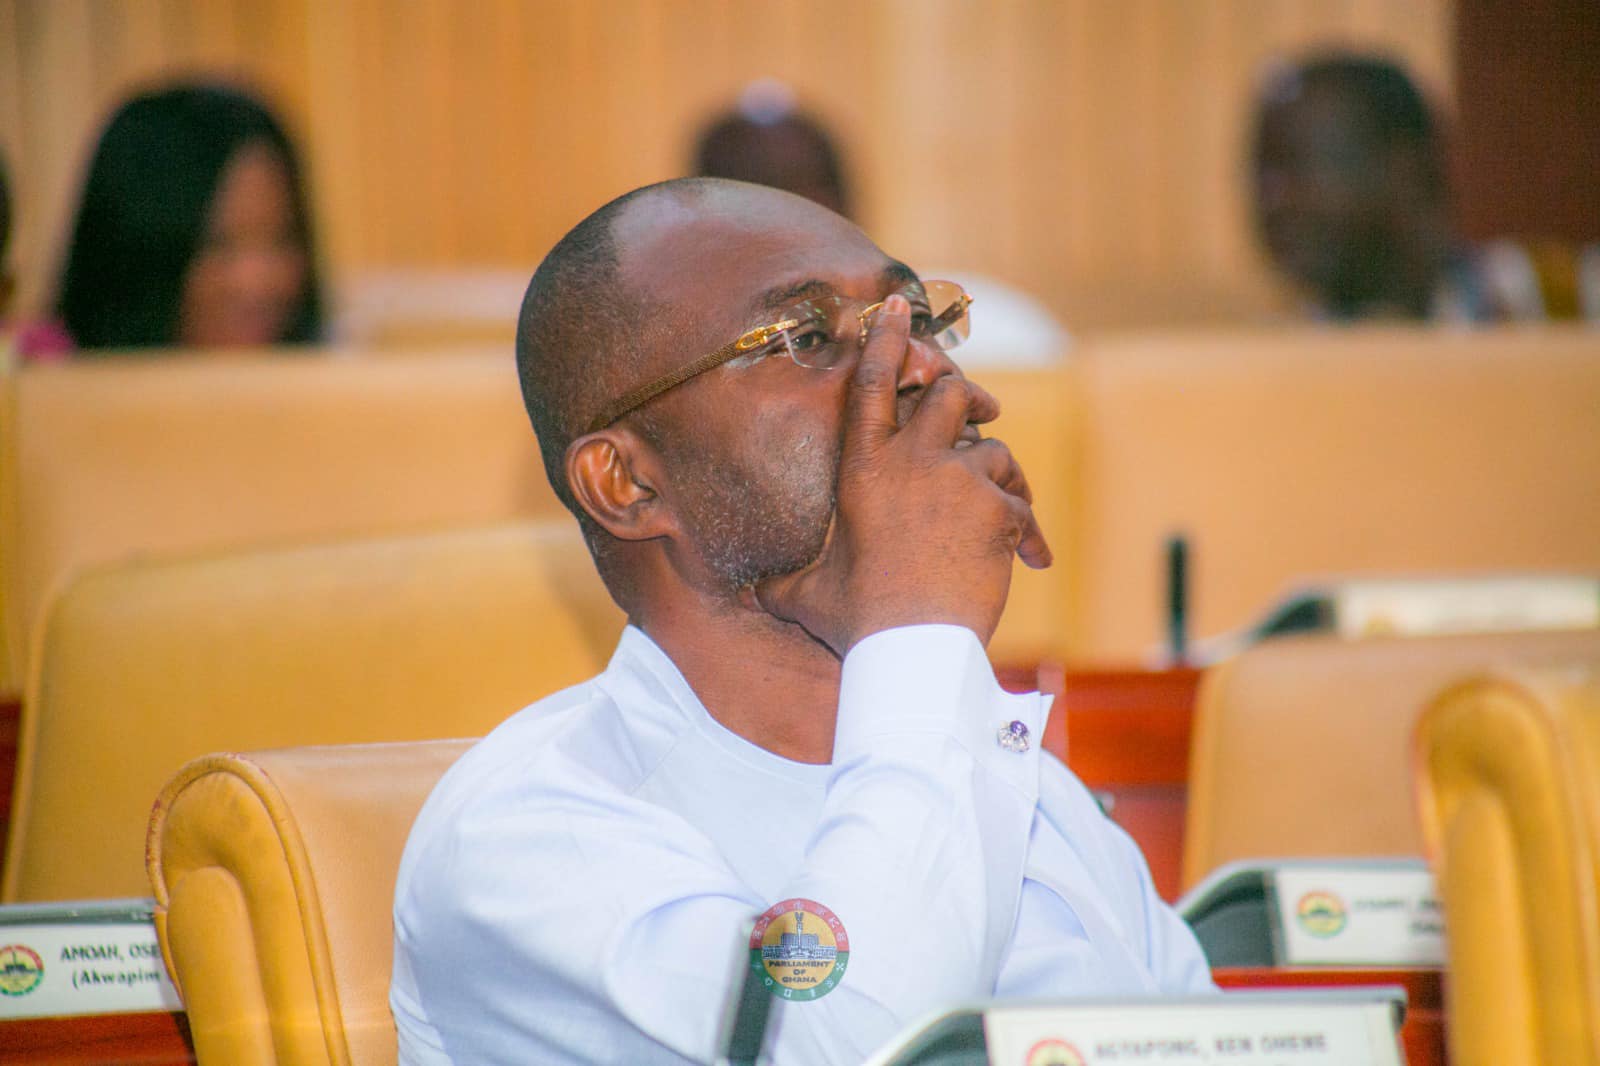 “We’re a formidable force in the NPP; no major decision will be taken without consulting us” – Ken Agyapong thanks supporters